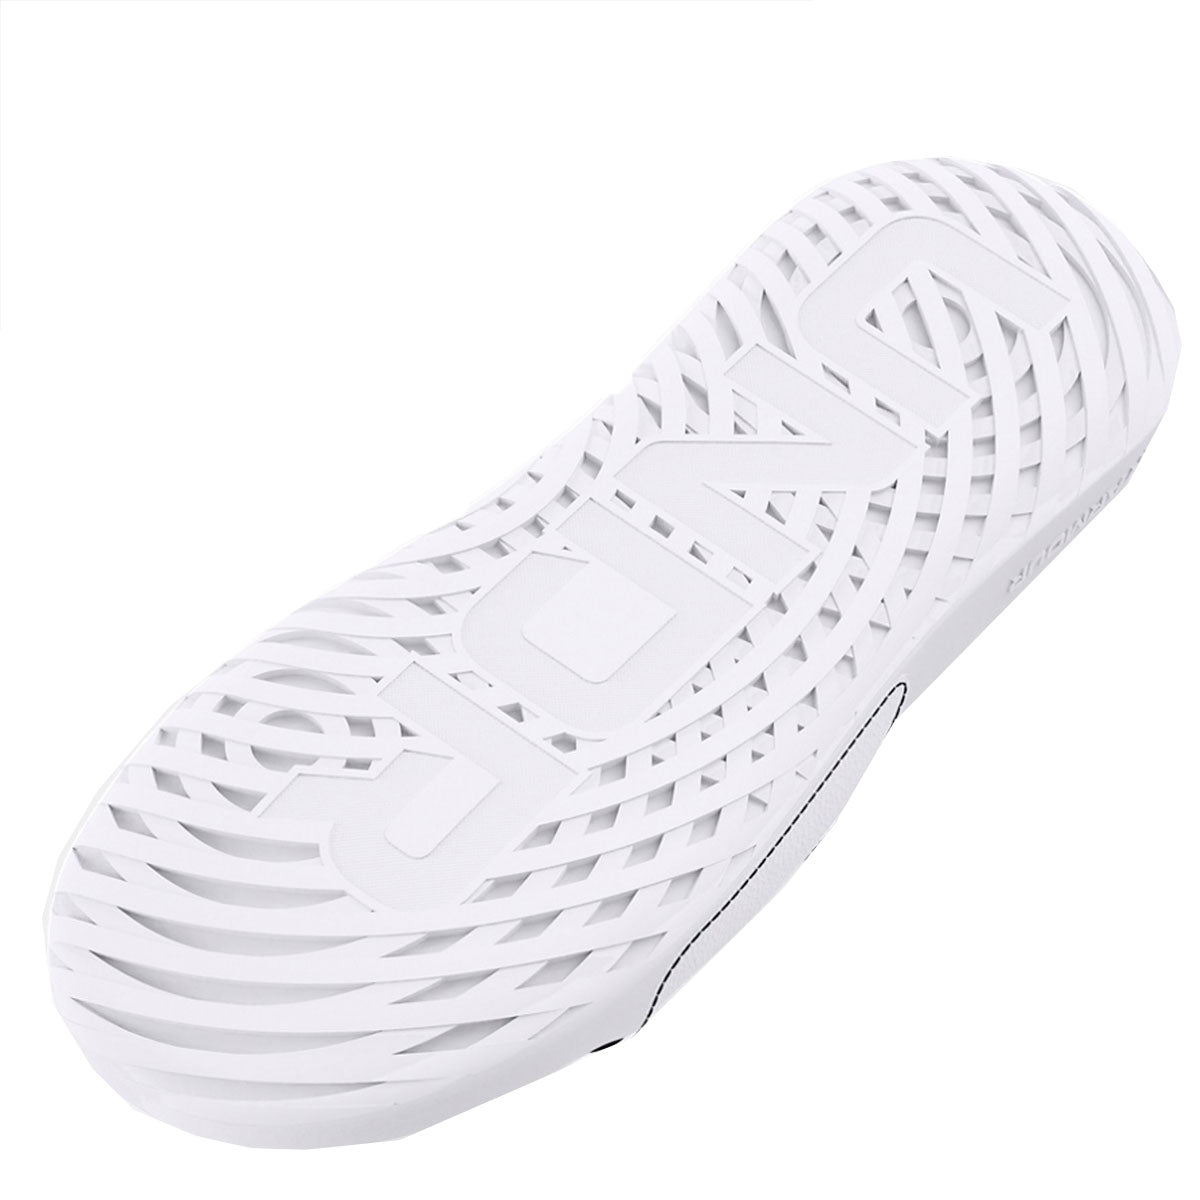 Under Armour Ignite Select Sliders - Adult - White/Black